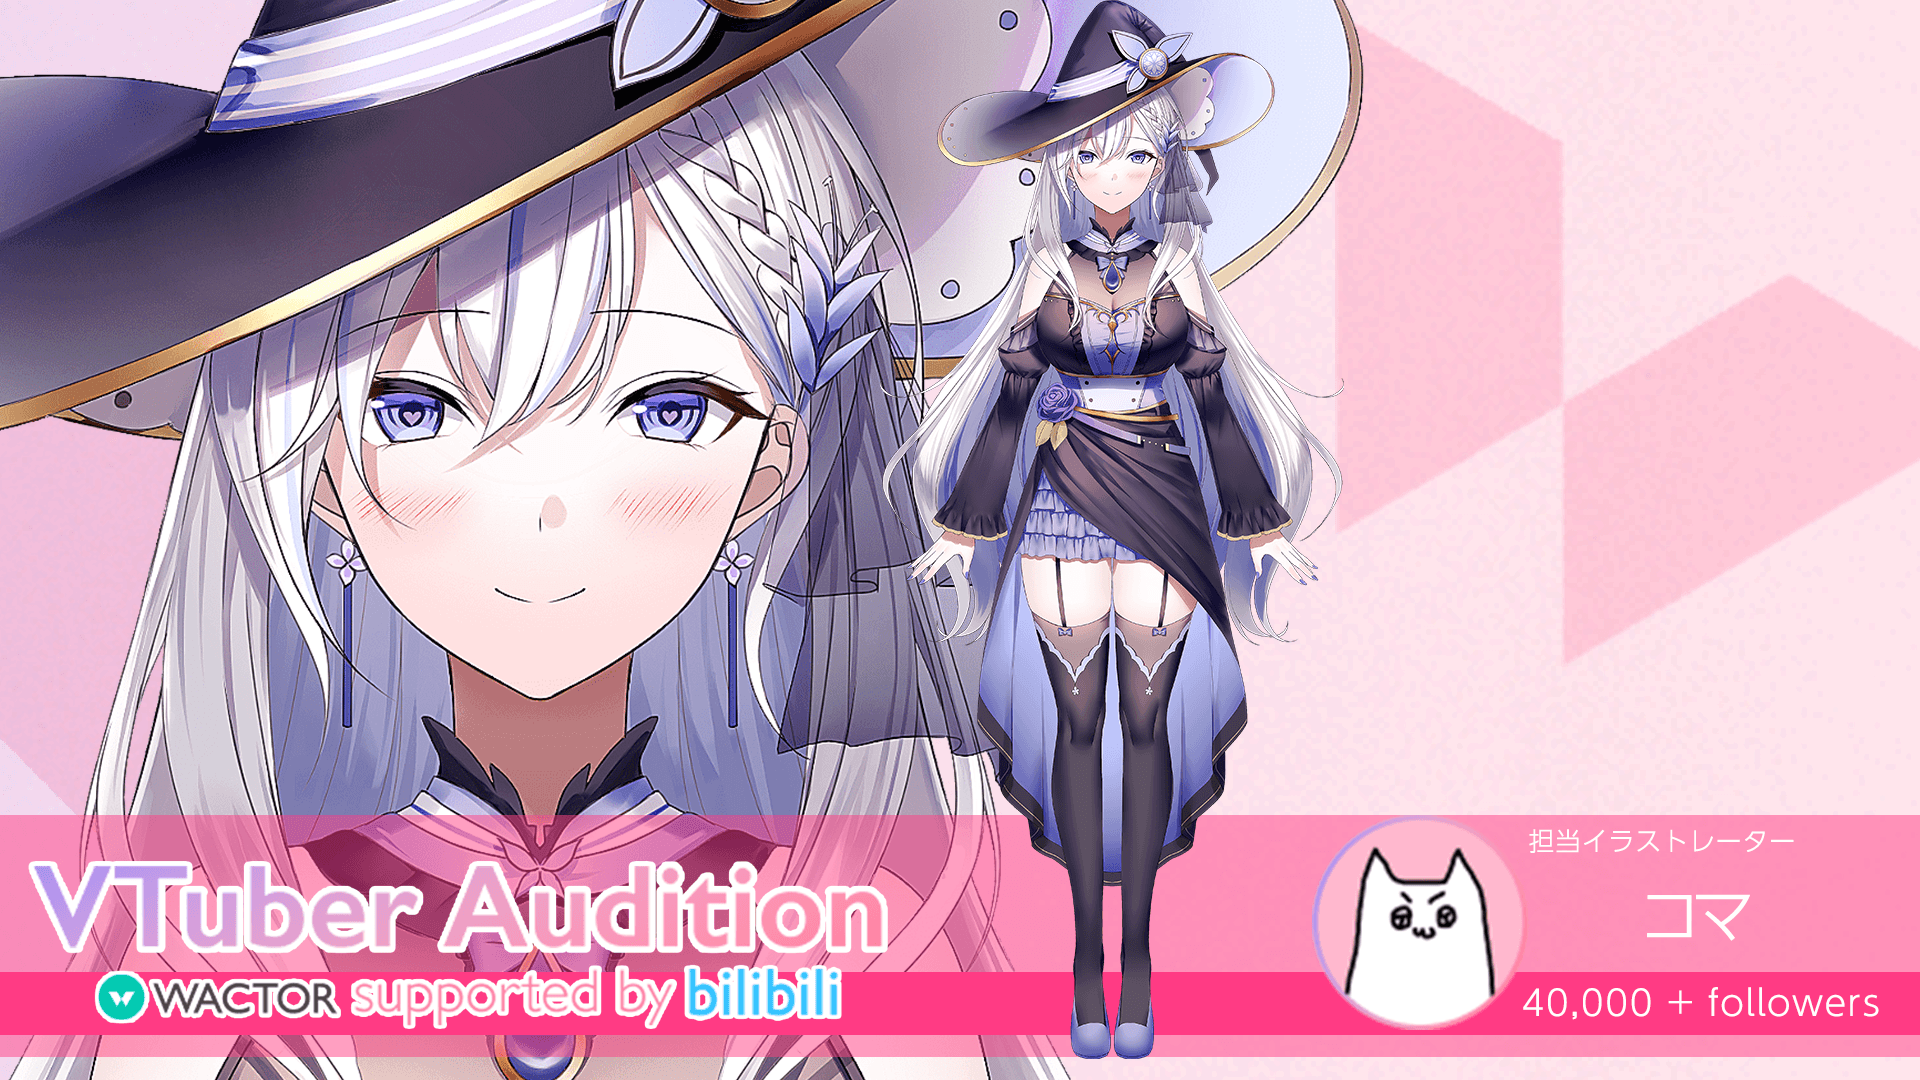 wactor-vtuber-audition-supported-by-bilibili-7-2